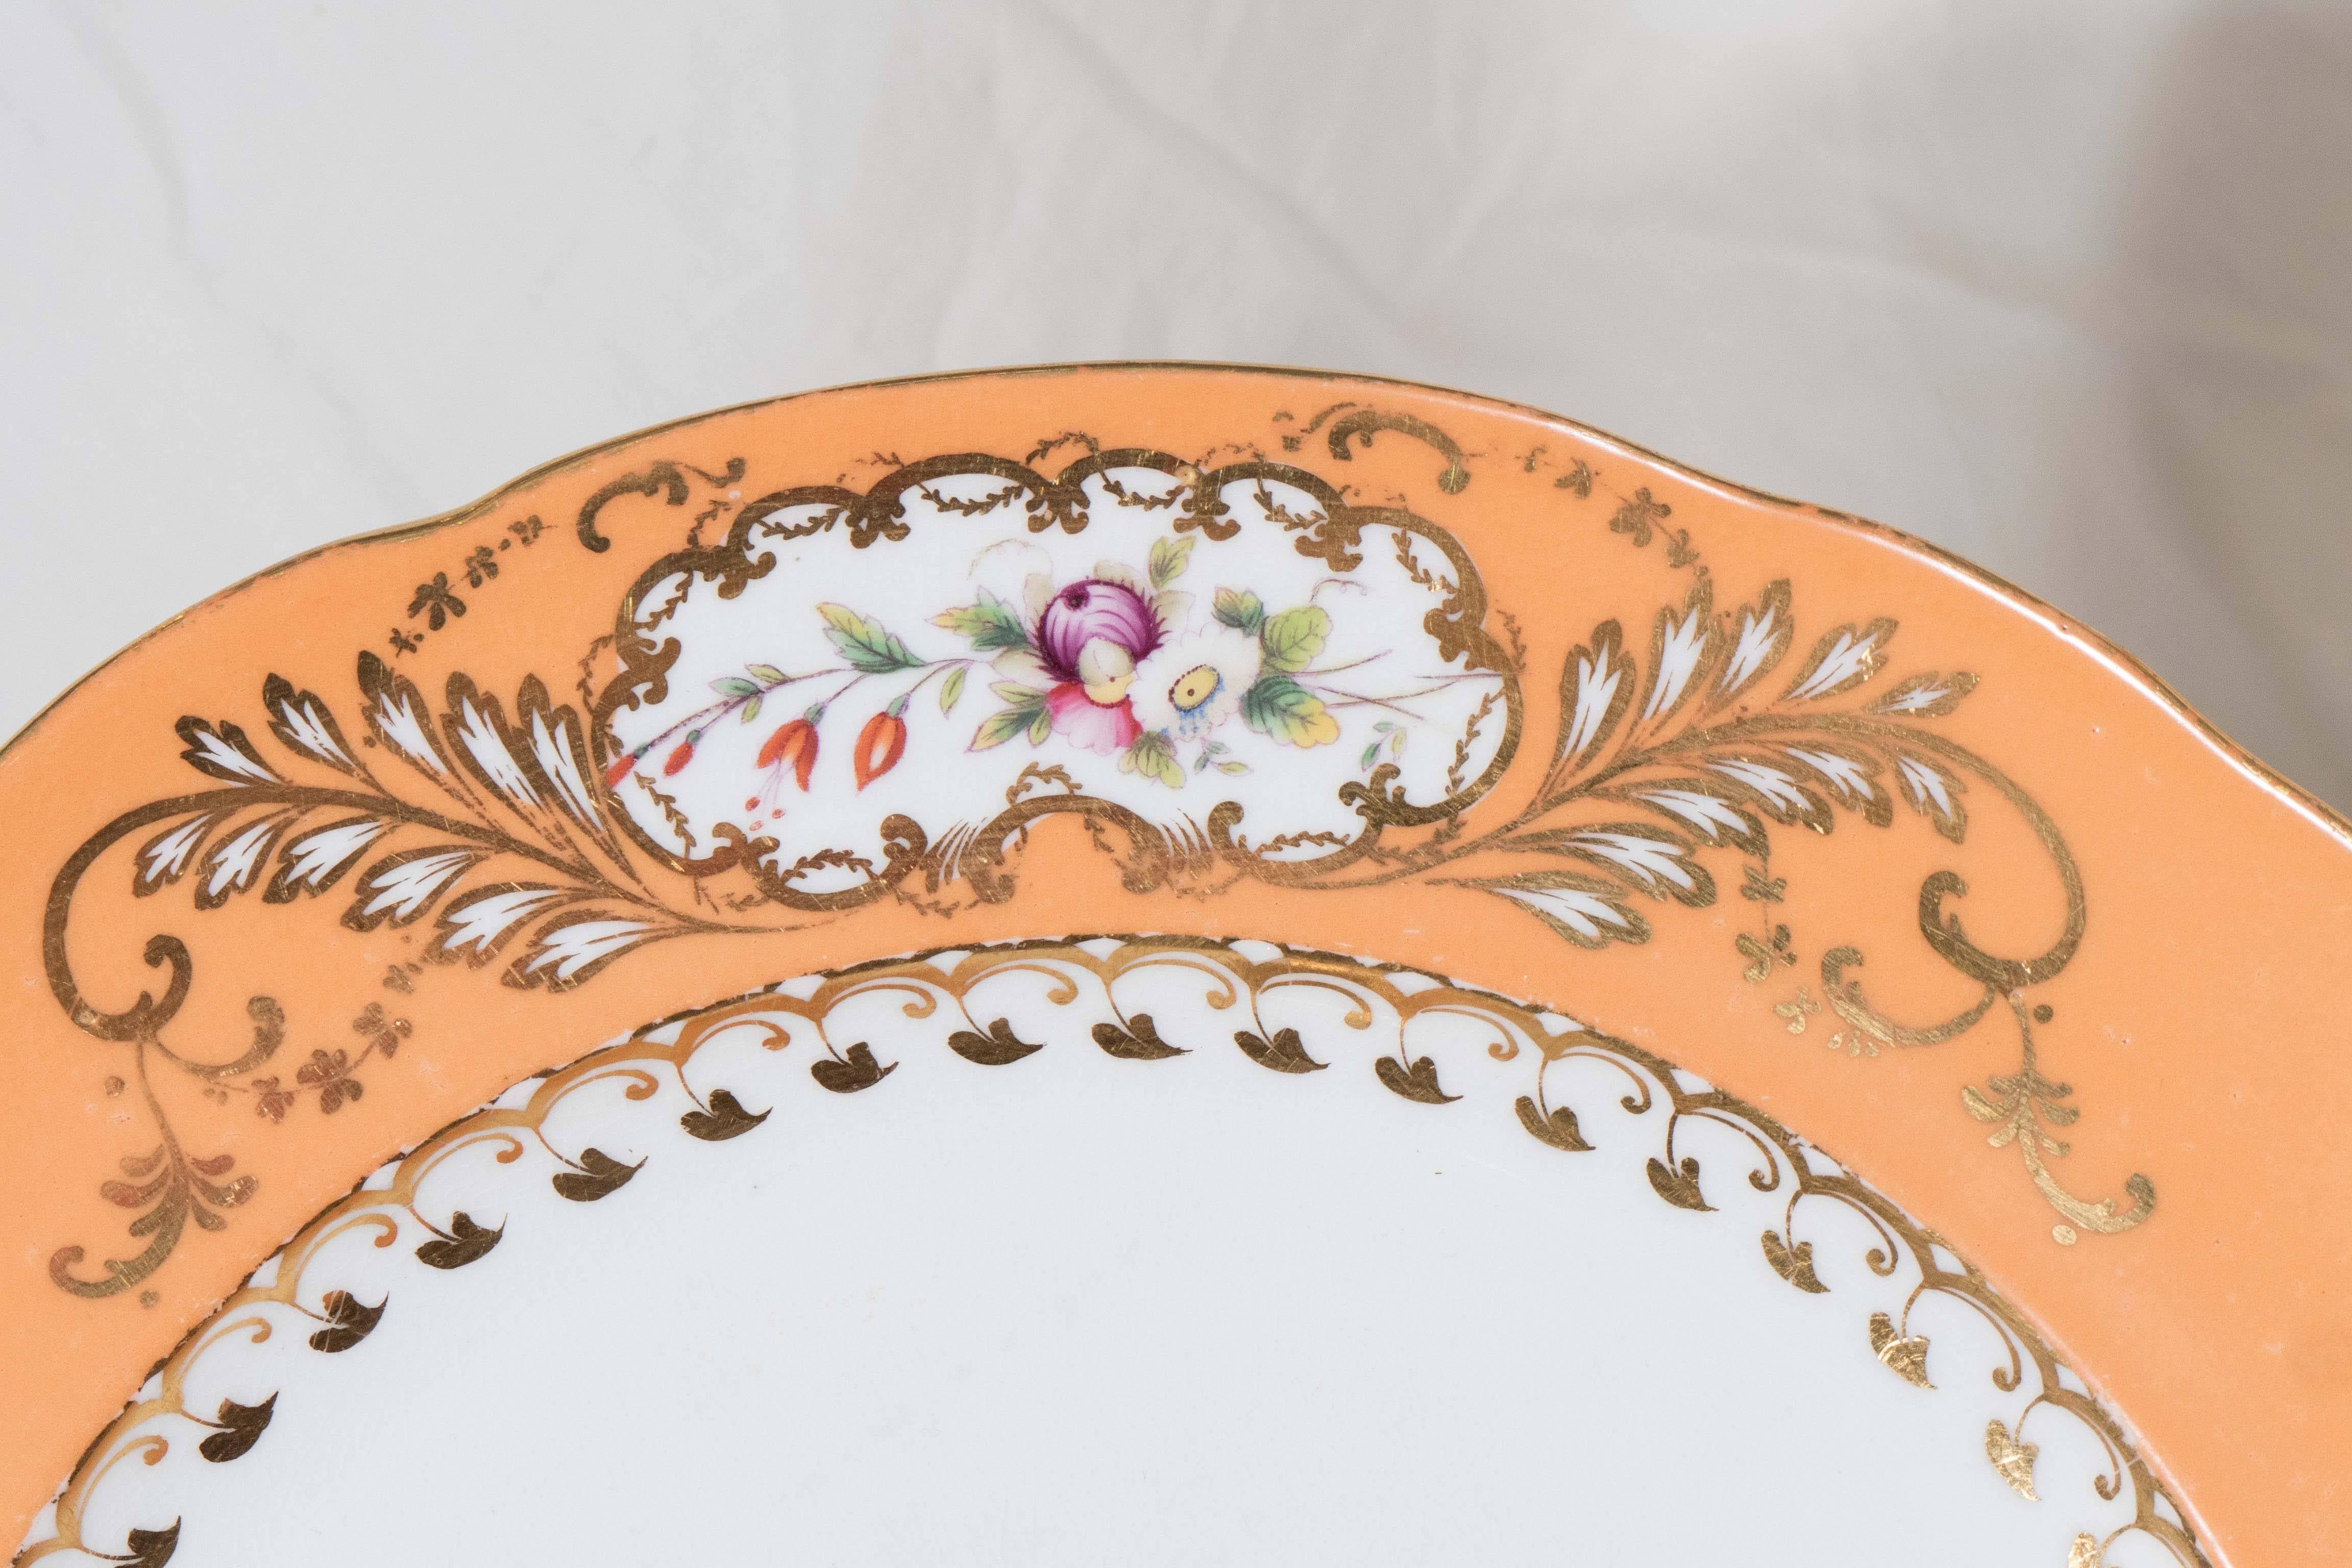 19th Century Antique English Porcelain Dishes with Wide Orange Borders